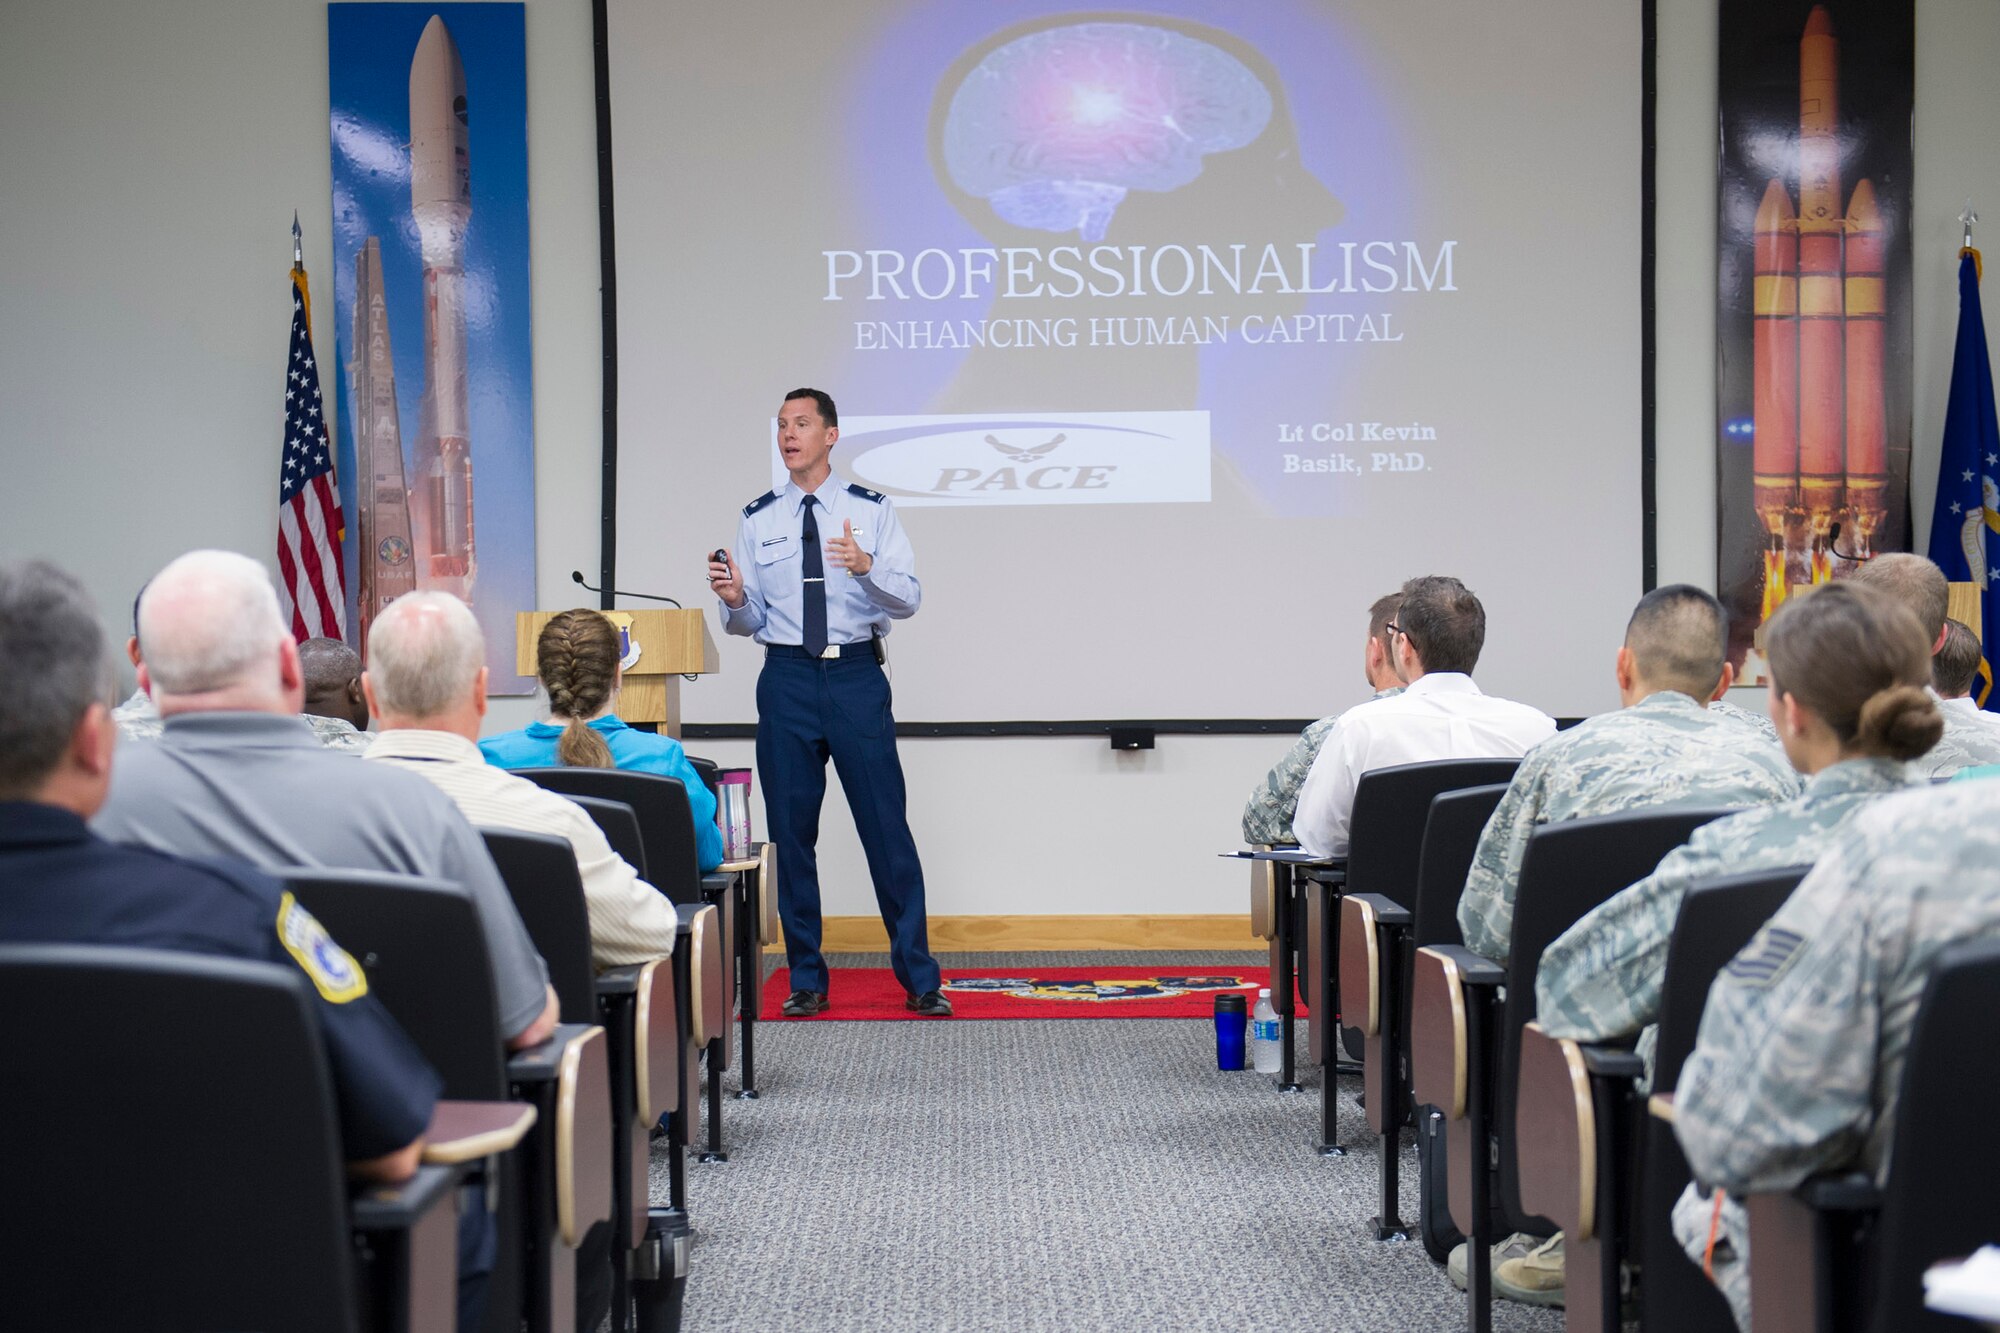 Lt. Col. Kevin Basik, PhD, the U.S. Air Force representative to the office of the Senior Advisor to the Secretary of Defense for Military Professionalism, spoke to the 45th Space Wing about Professionalism, Enhancing Human Capital April 26, 2016 at the Patrick Air Force Base Professional Development Center, Fla. The course provided an initiative in-depth discussion at the deliberate path for the development and determination of future leaders. (U.S. Air Force photos/Matthew Jurgens) (Released) 
